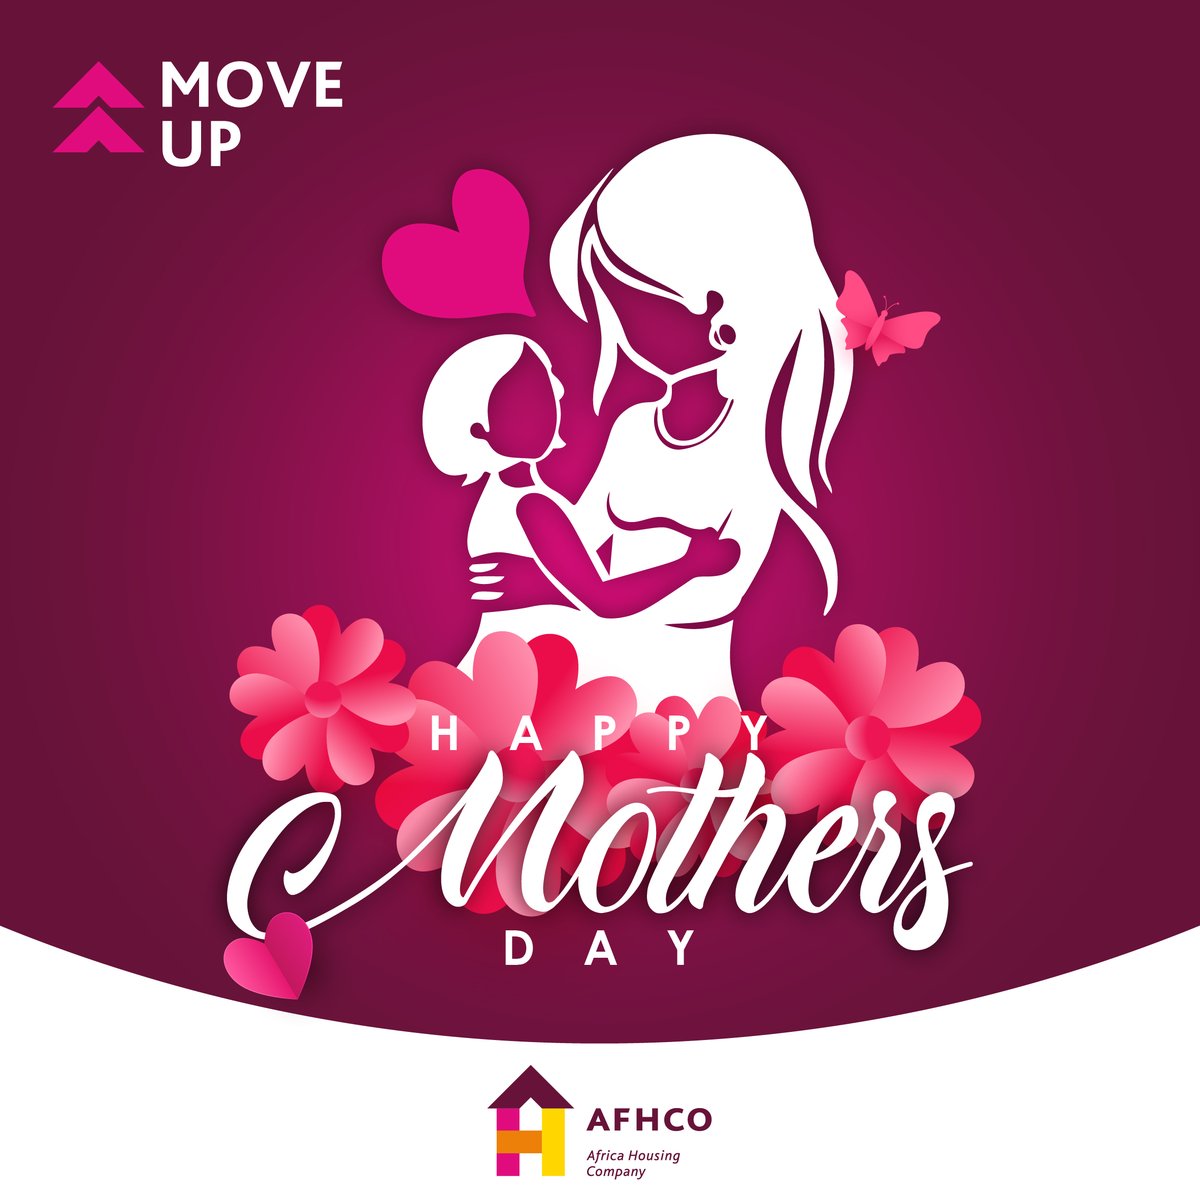 Let's celebrate and honor the mother of the family or individual, as well as motherhood, maternal bonds, and the influence of mothers in society. #HappyMothersDay! #MoveUp #StaywithAFHCO #apartmentstolet #MoveUpwithAFHCO #AFHCO #propertymanagement #rent #apartments #johannesburg